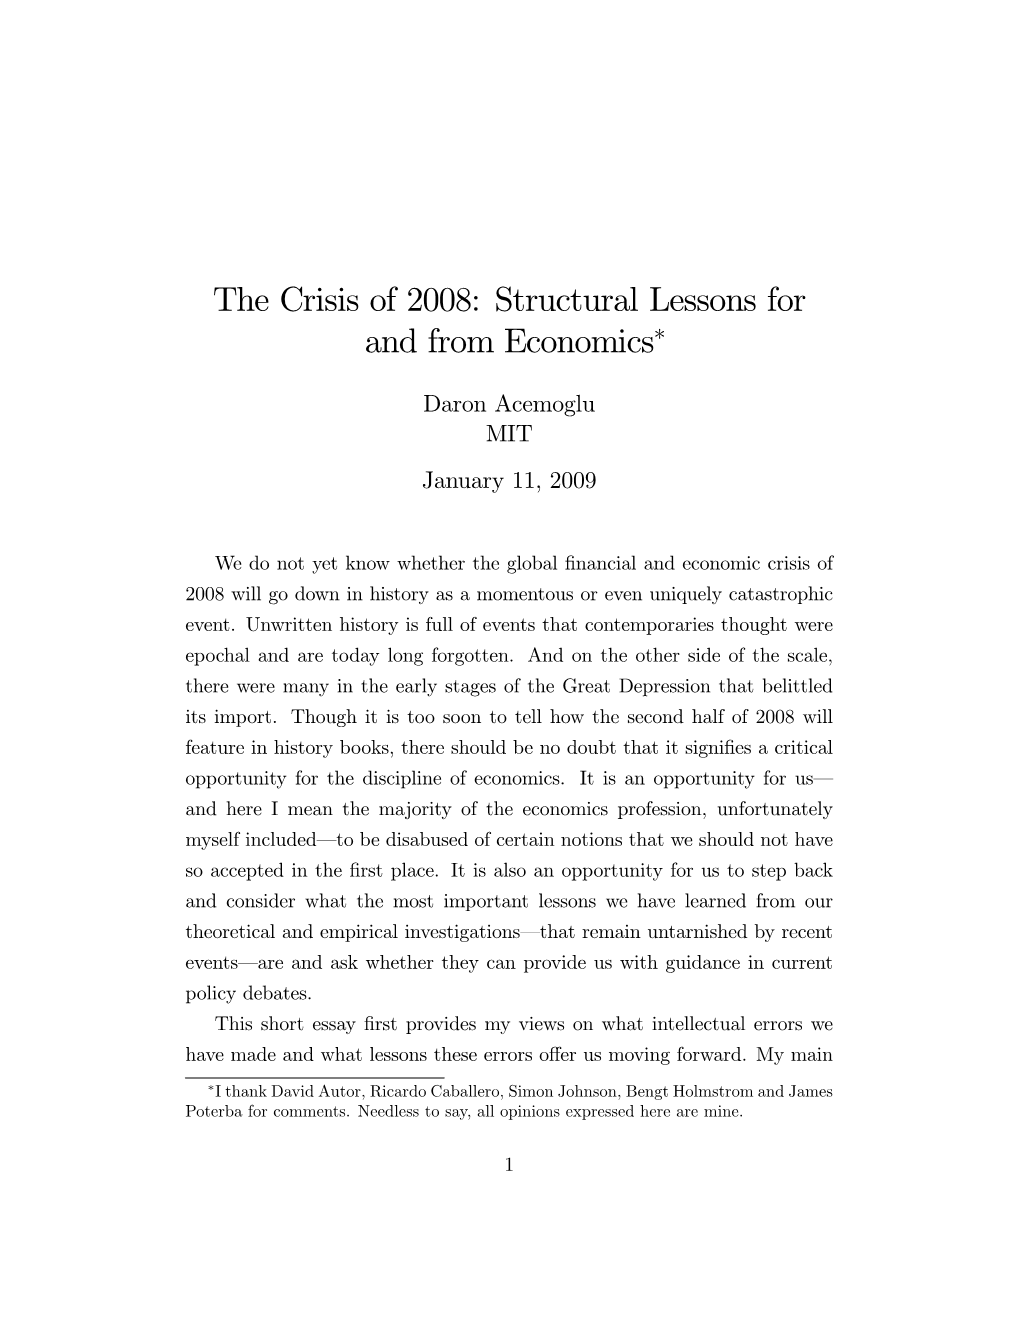 The Crisis of 2008: Structural Lessons for and from Economics